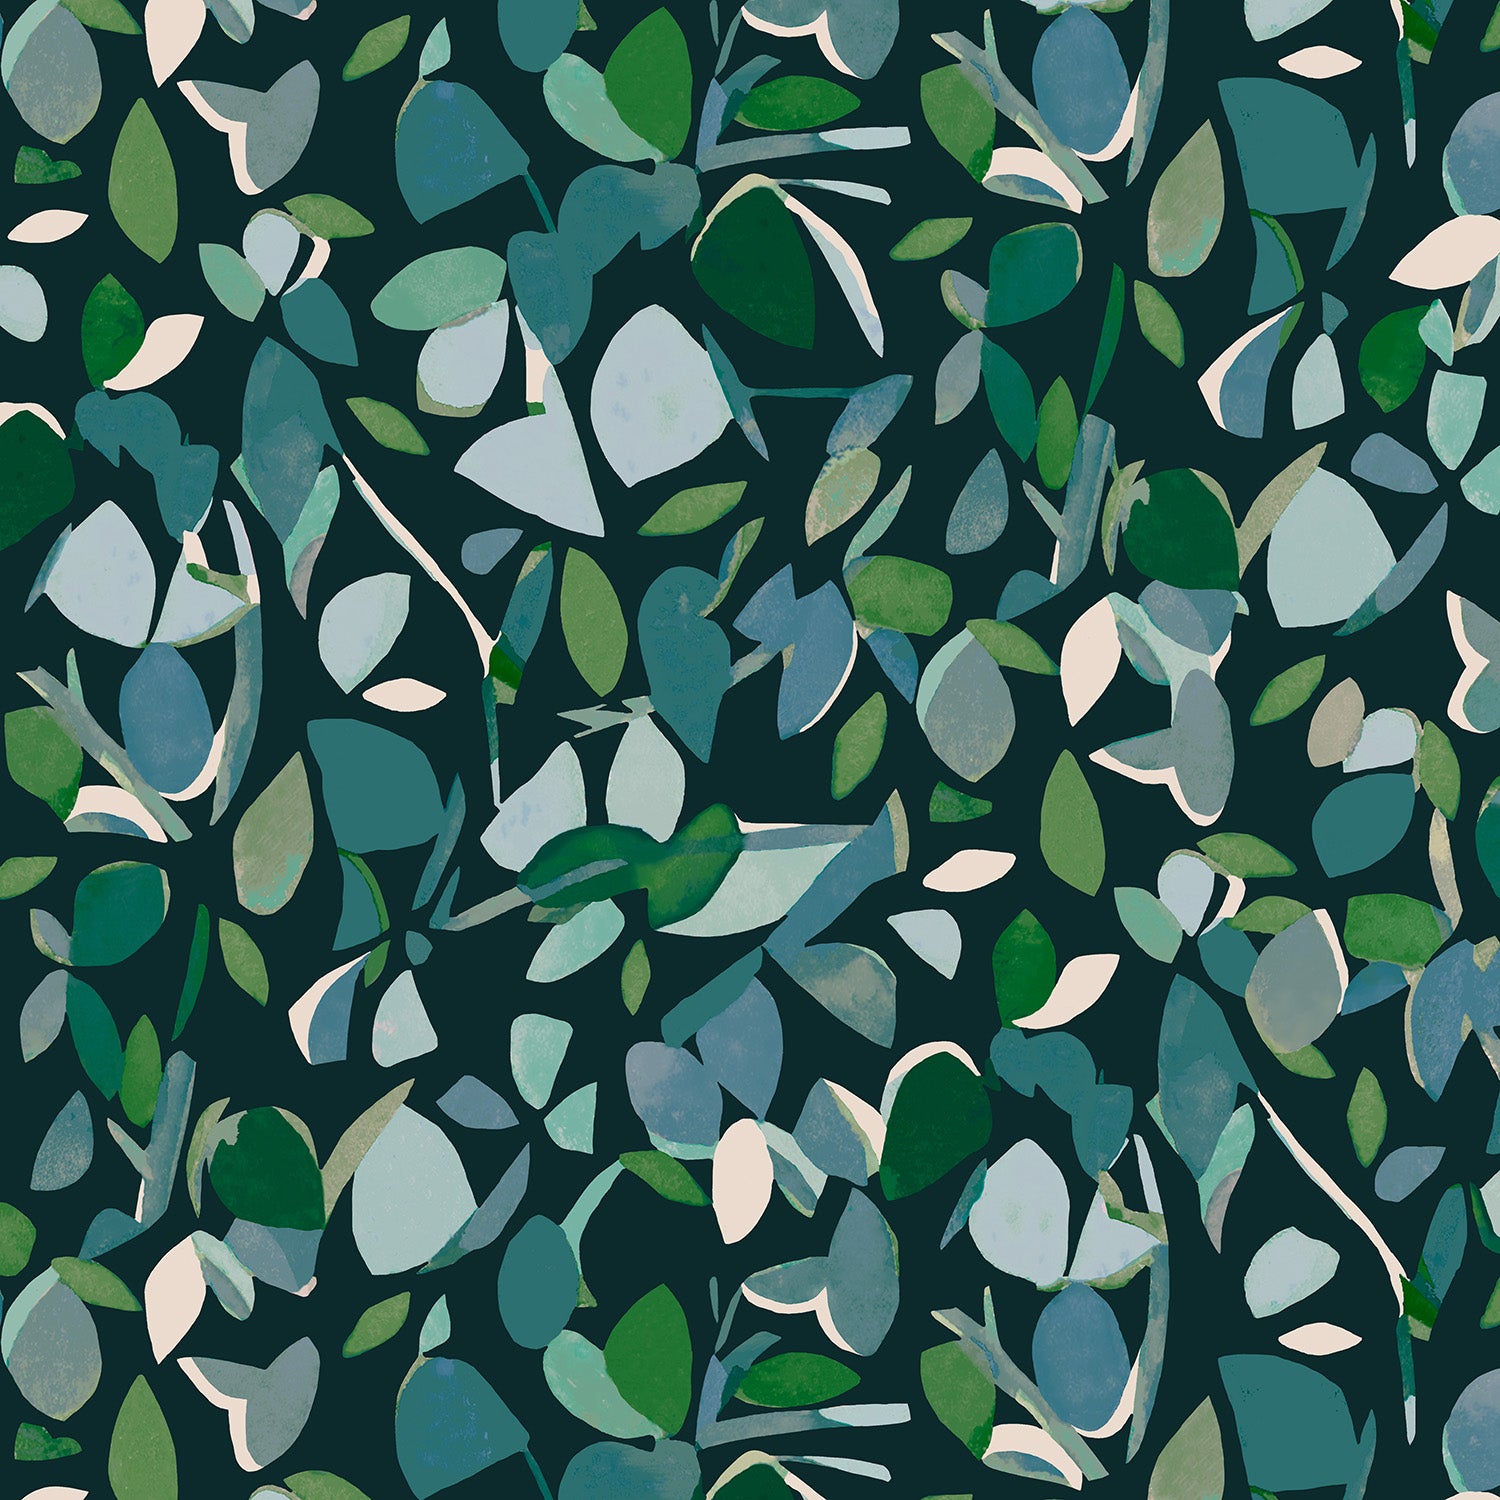 Detail of wallpaper in a minimal leaf print in shades of blue and green on a navy field.